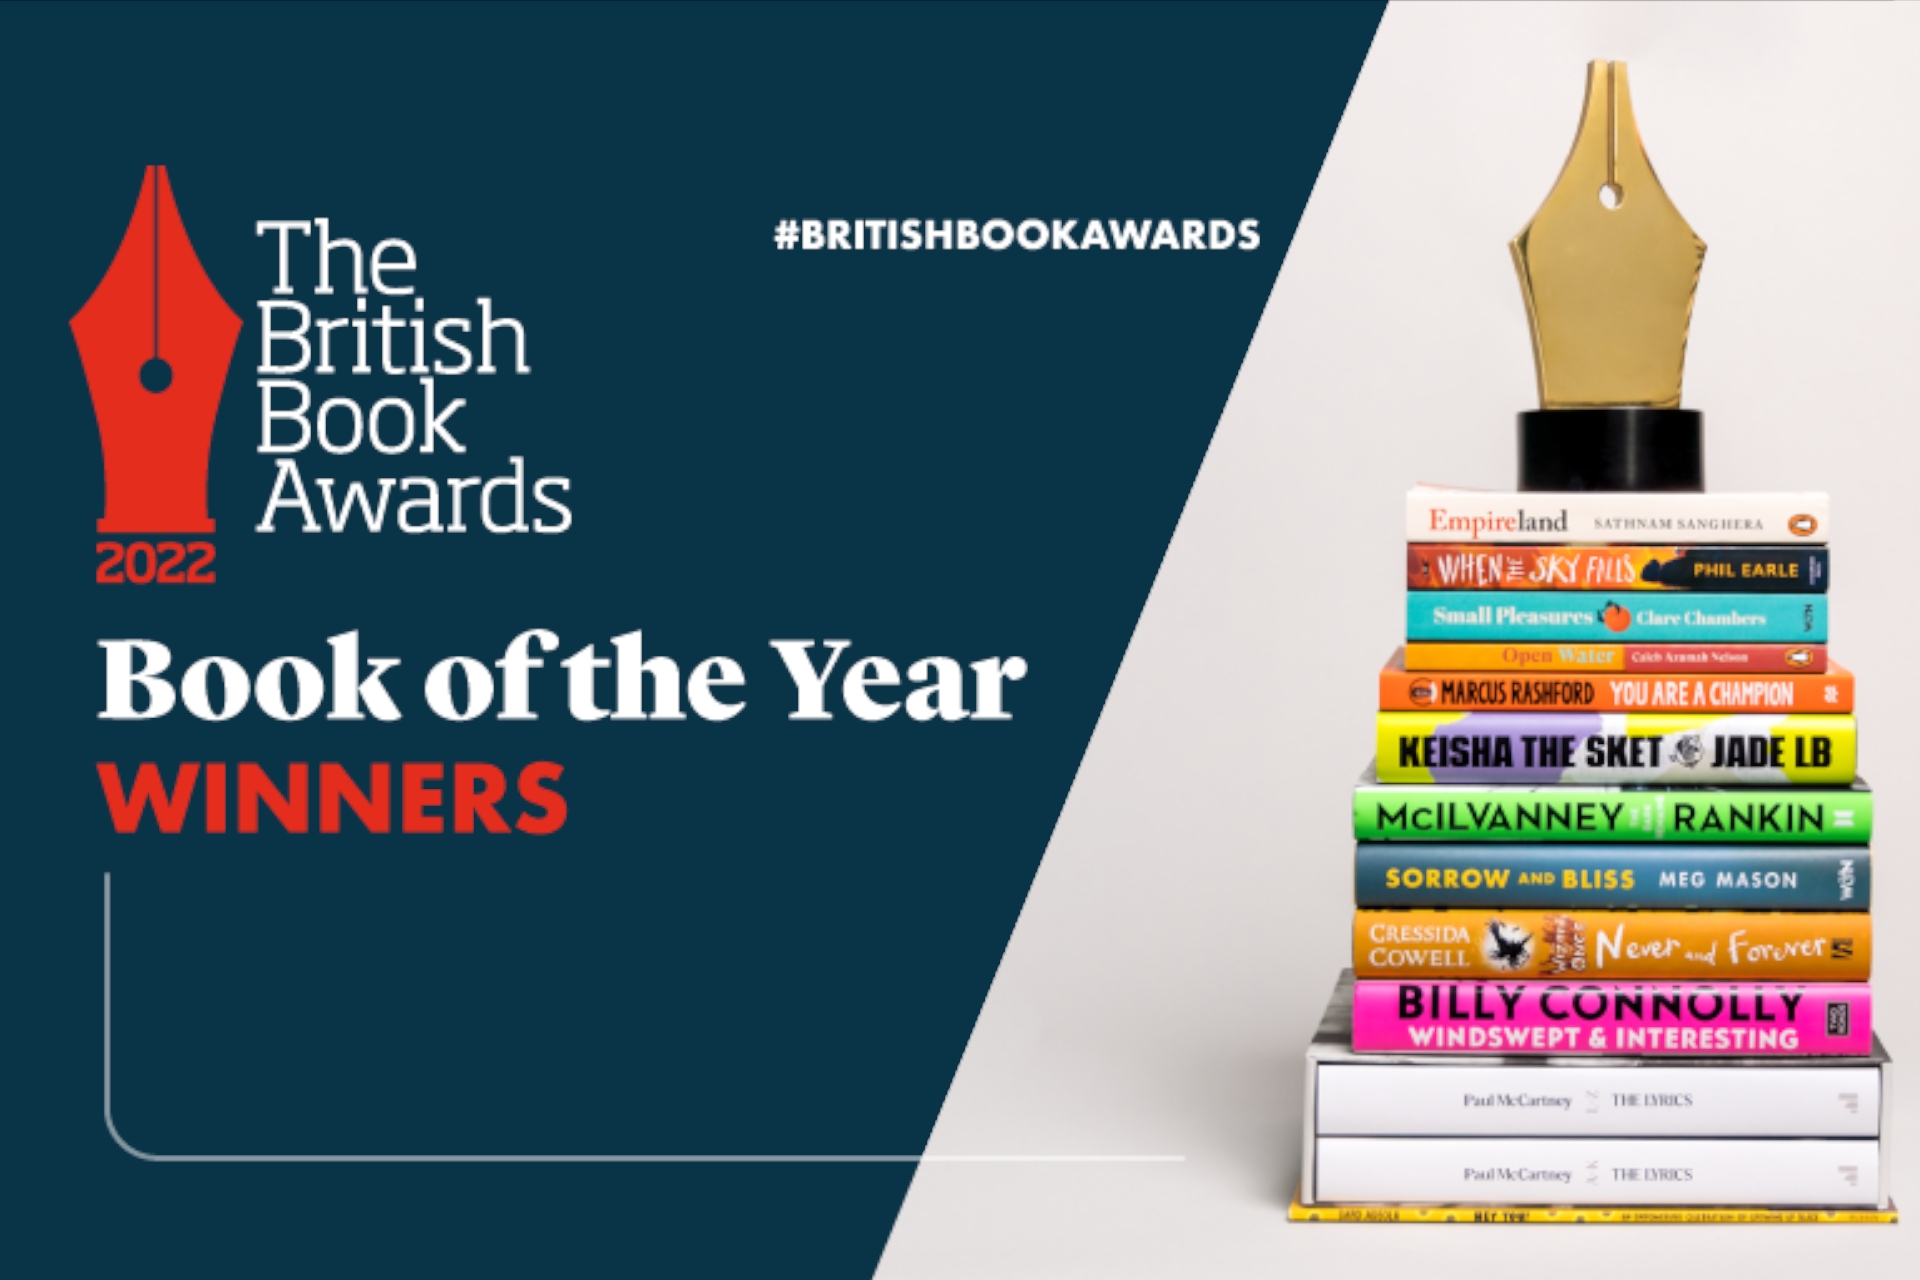 The British Book Awards 2022 Winners are Announced at Biggest Ceremony Yet